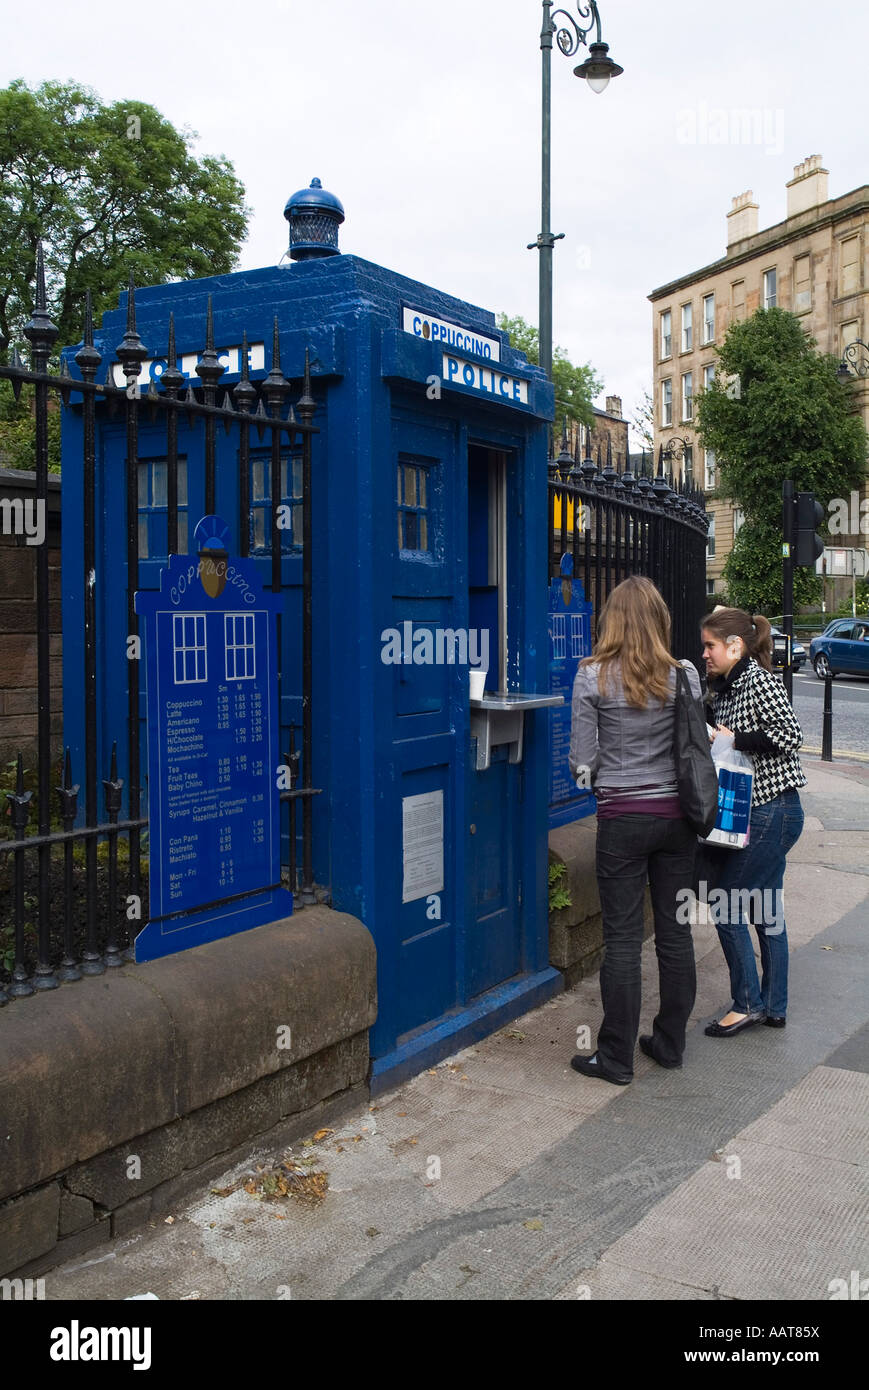 dh  KELVINSIDE GLASGOW Two girls buying coffee from Old Police box blue kiosk novelty cafe innovation people cafes Stock Photo